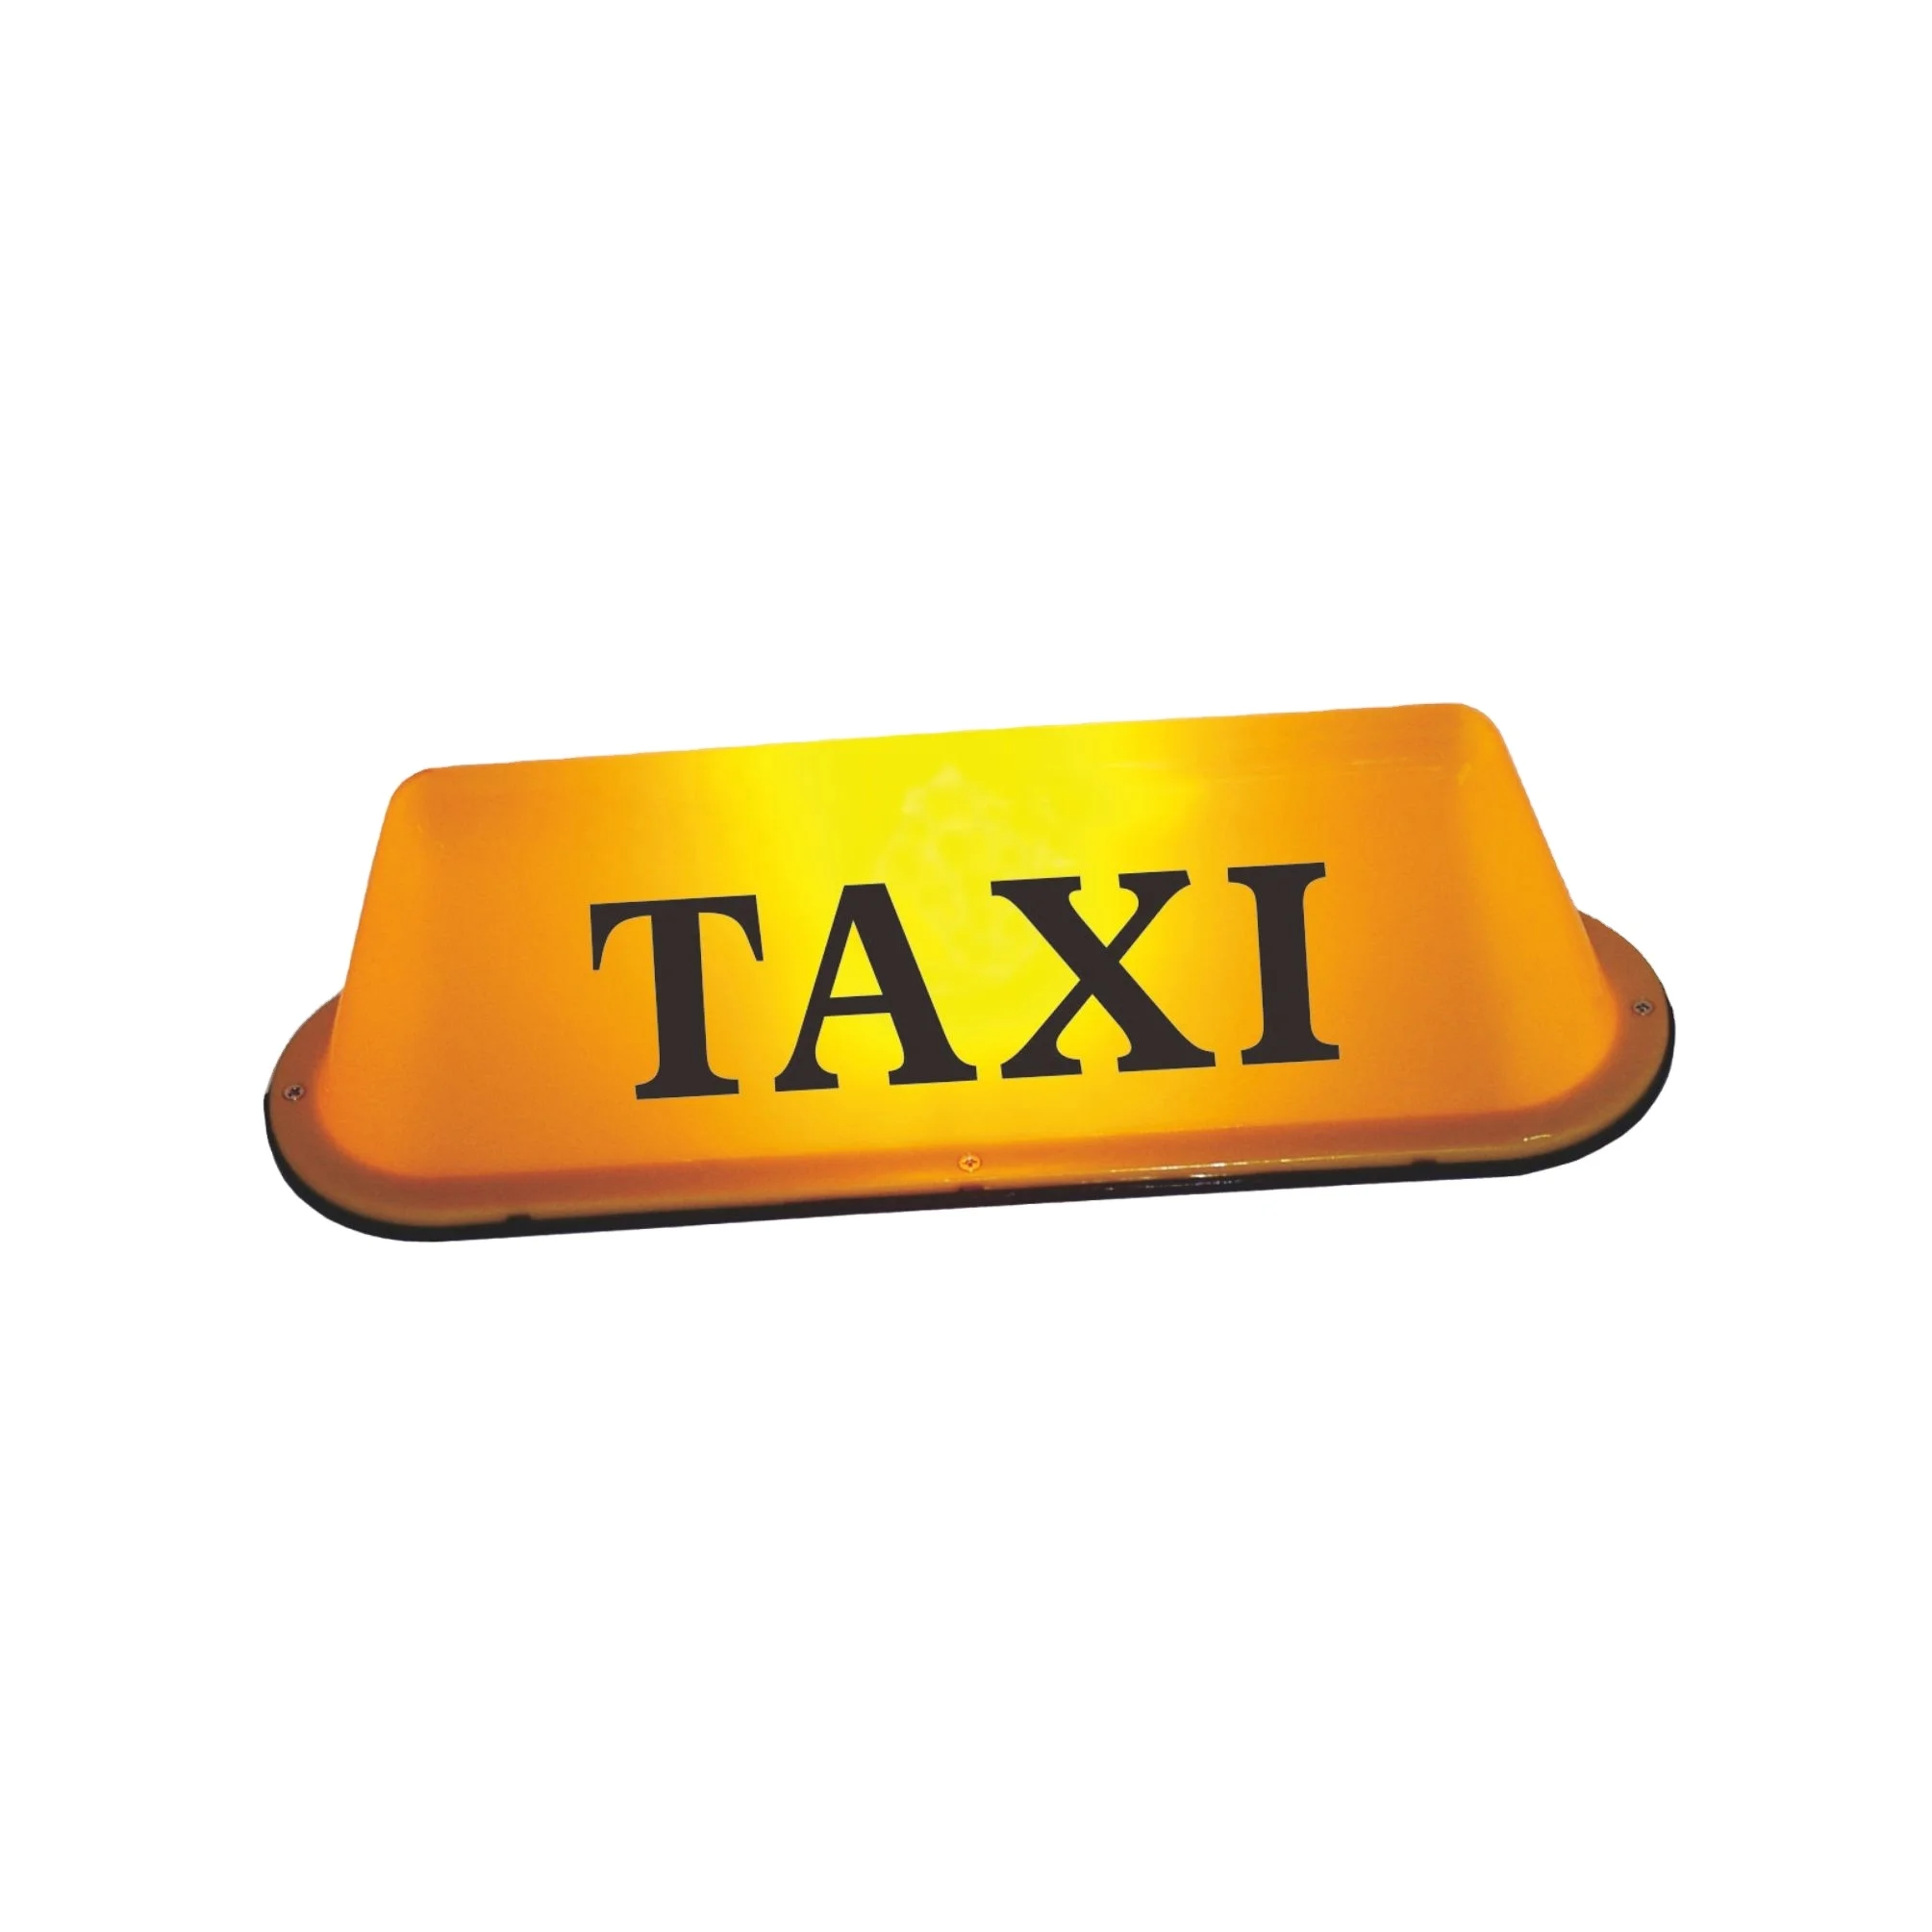 Top Productions taxi roof light box universal taxi light box roof sign  With ISO Certification